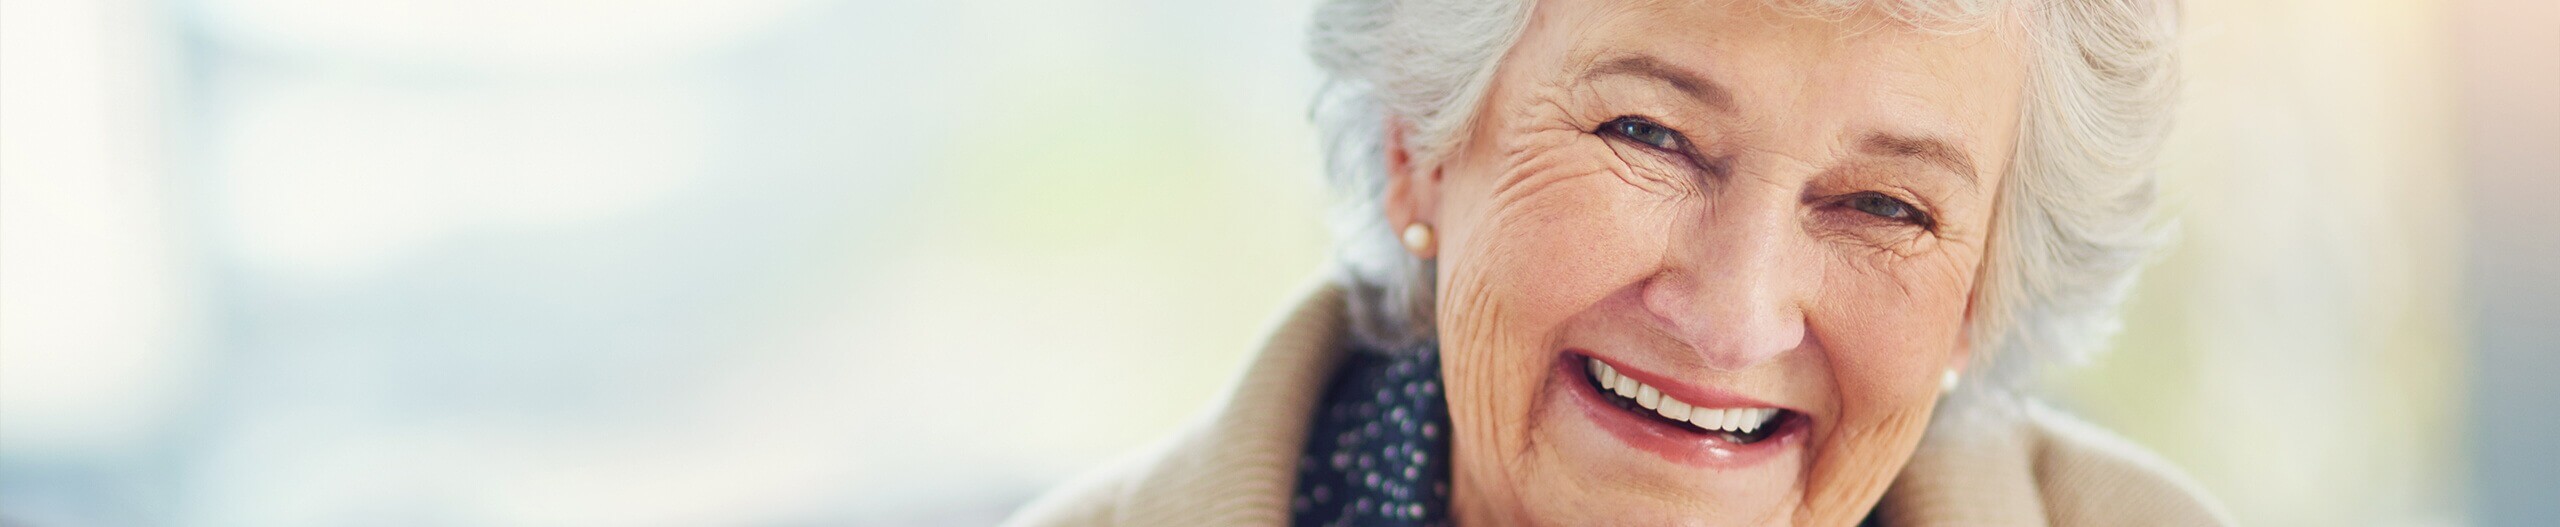 Elderly woman smiling with dentures